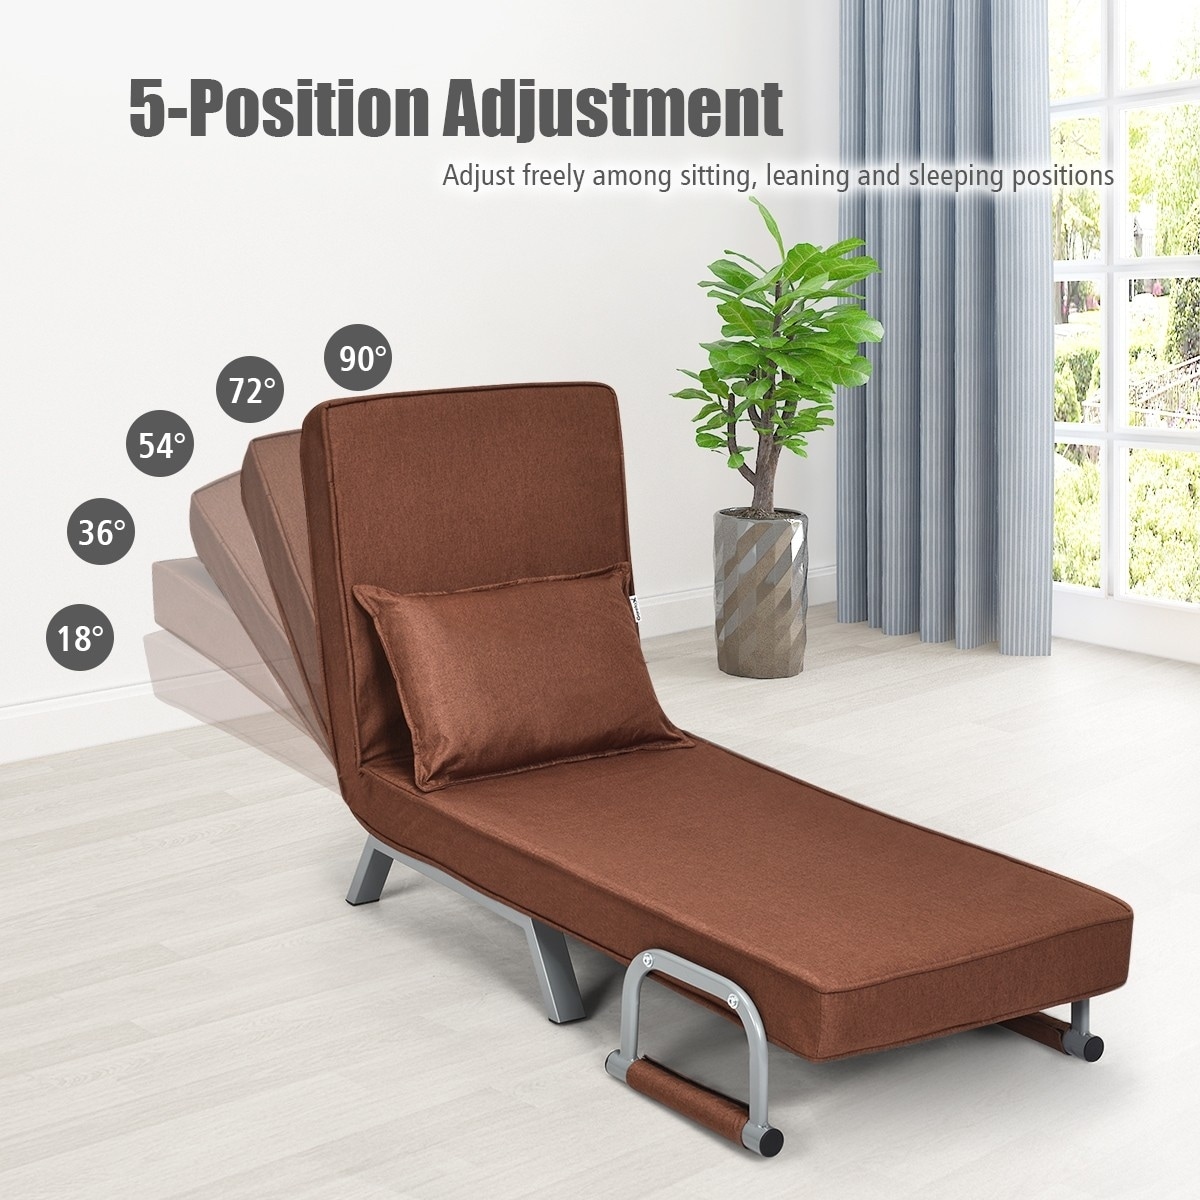 Details about   Folding Sleeper Flip Chair Convertible Sofa Bed Lounge Couch Pillow 5 Position 